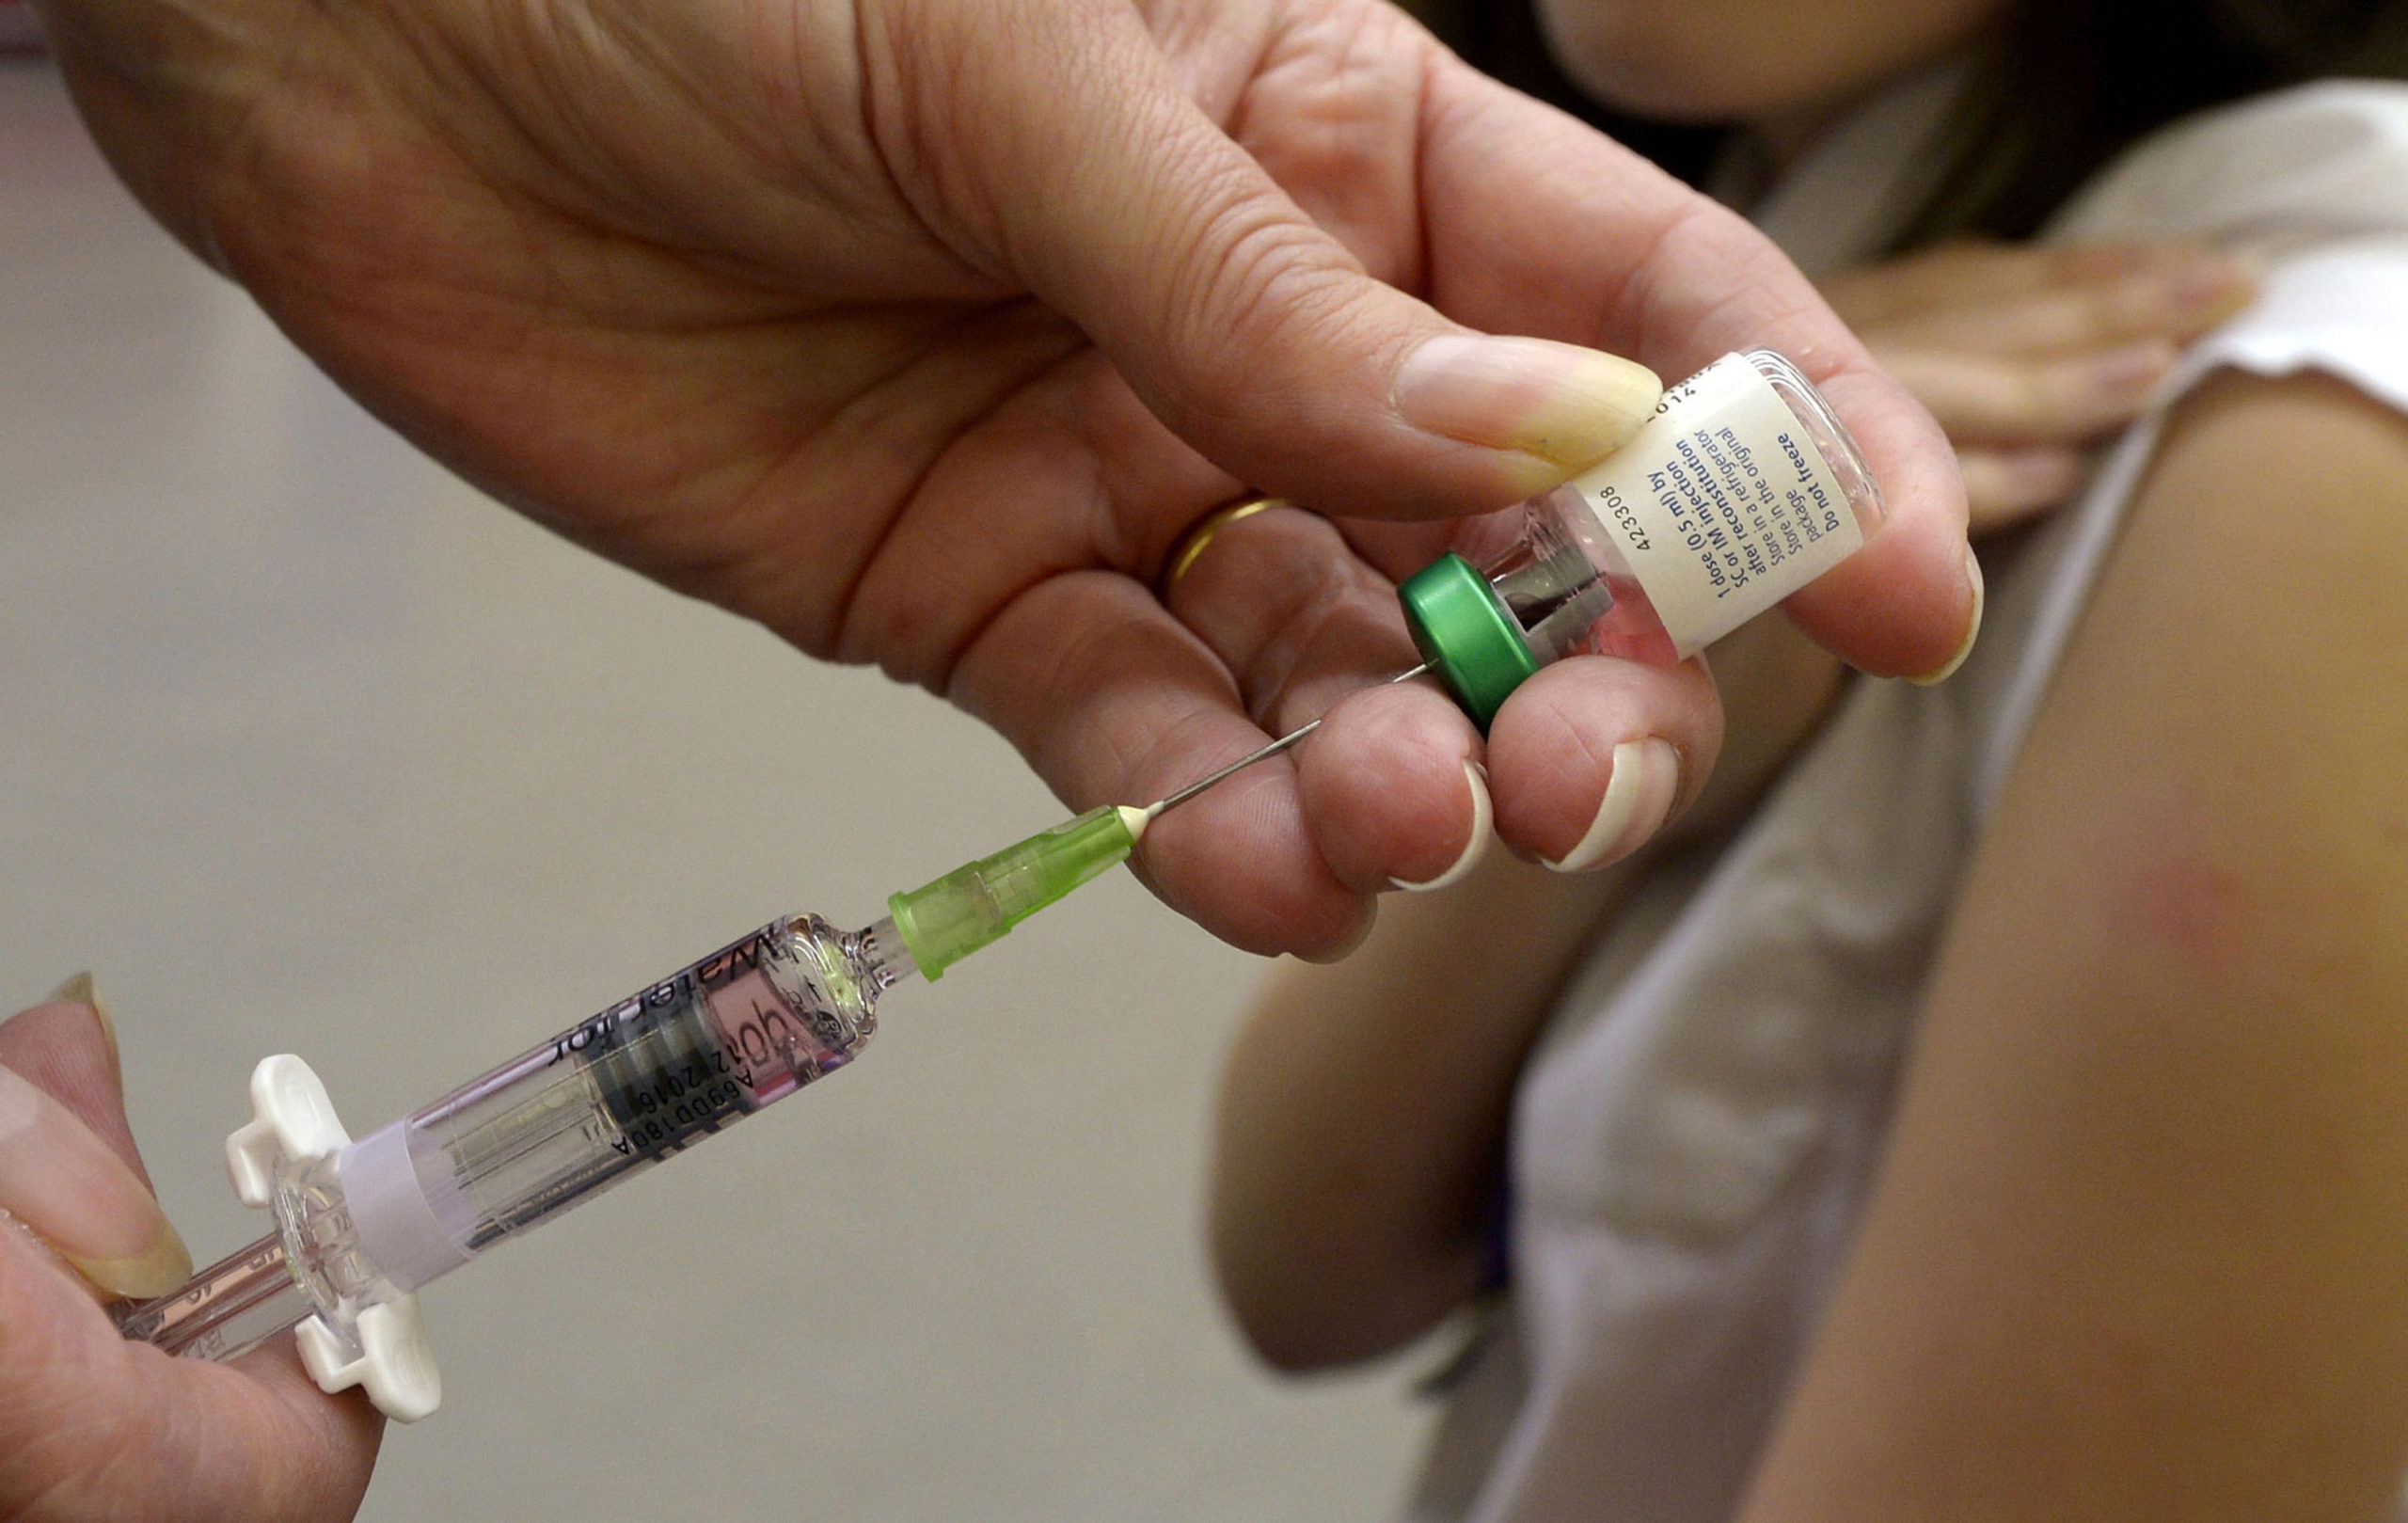 Many parents have not had their children vaccinated against measles.